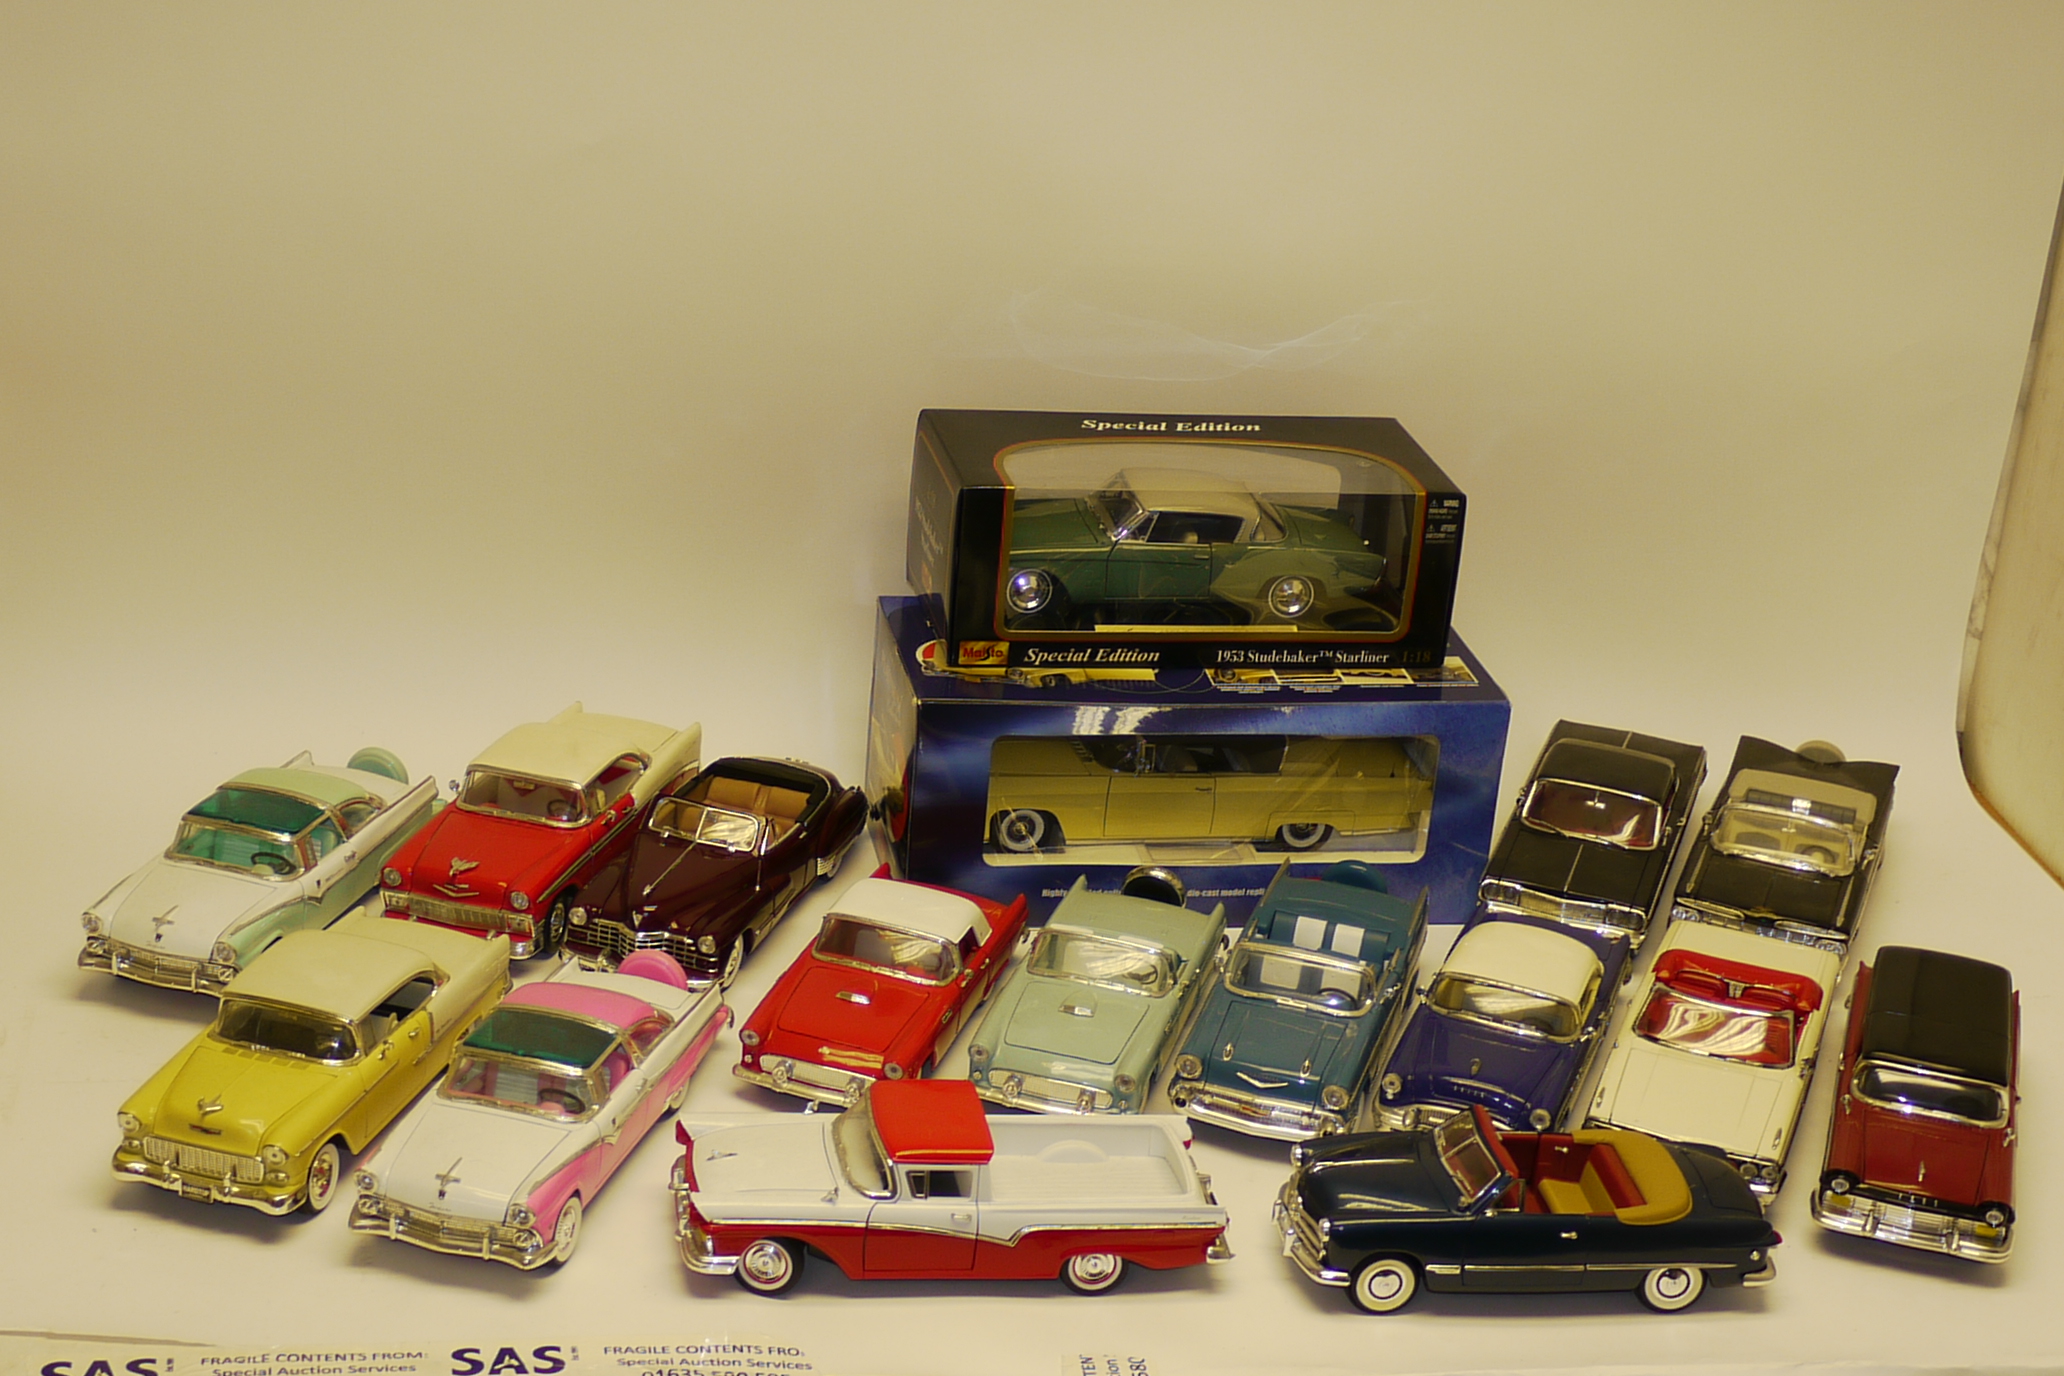 1:18 Scale American Vehicles, A collection of vintage private vehicles including examples by